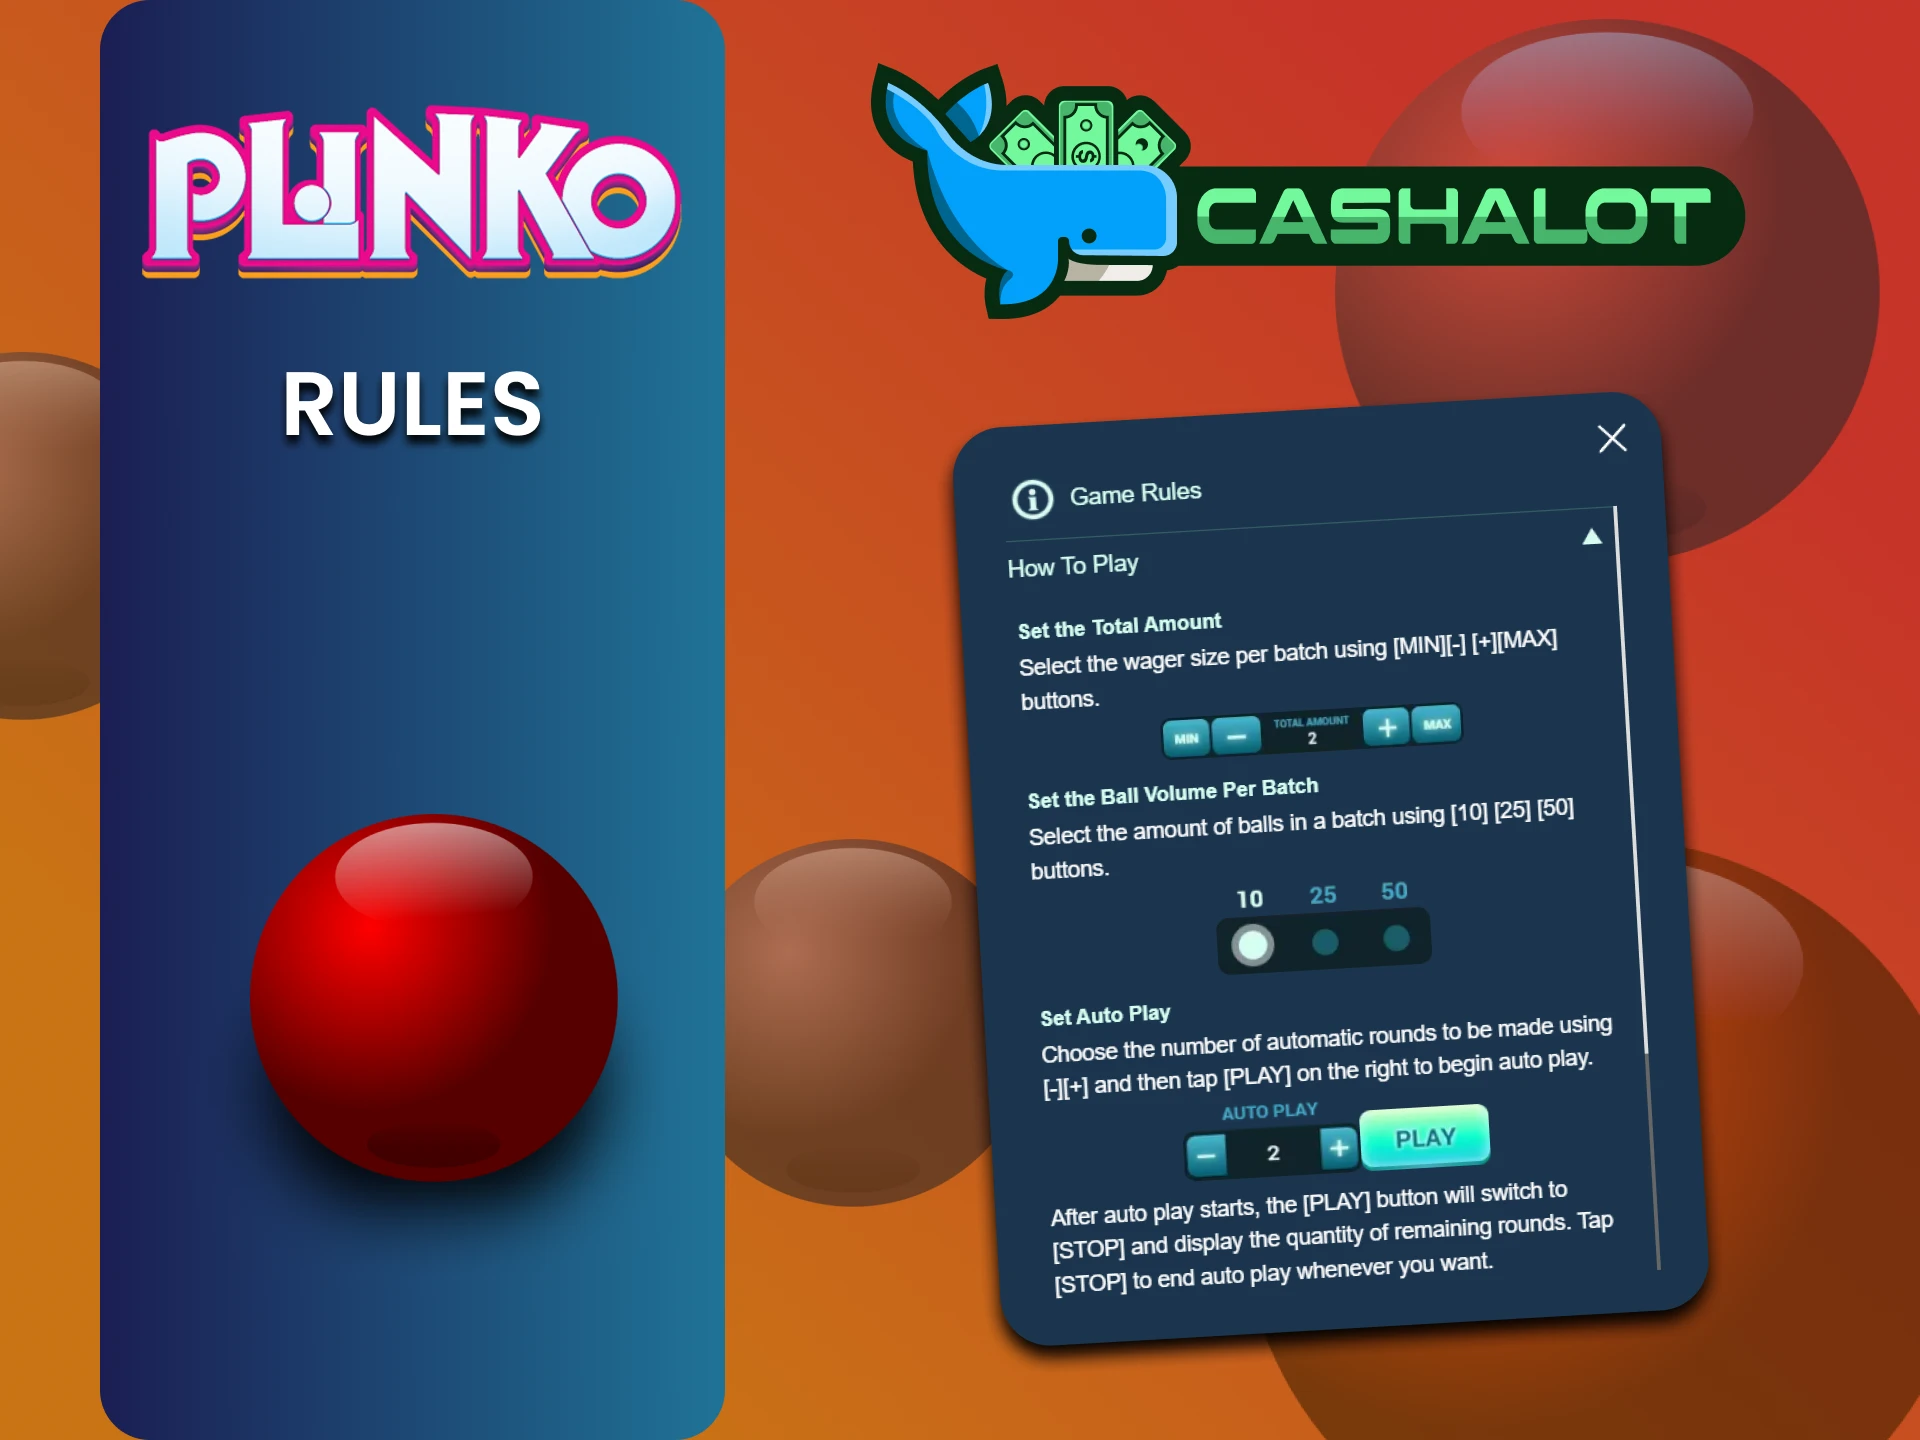 Before playing Plinko, study its rules on the Cashalot website.